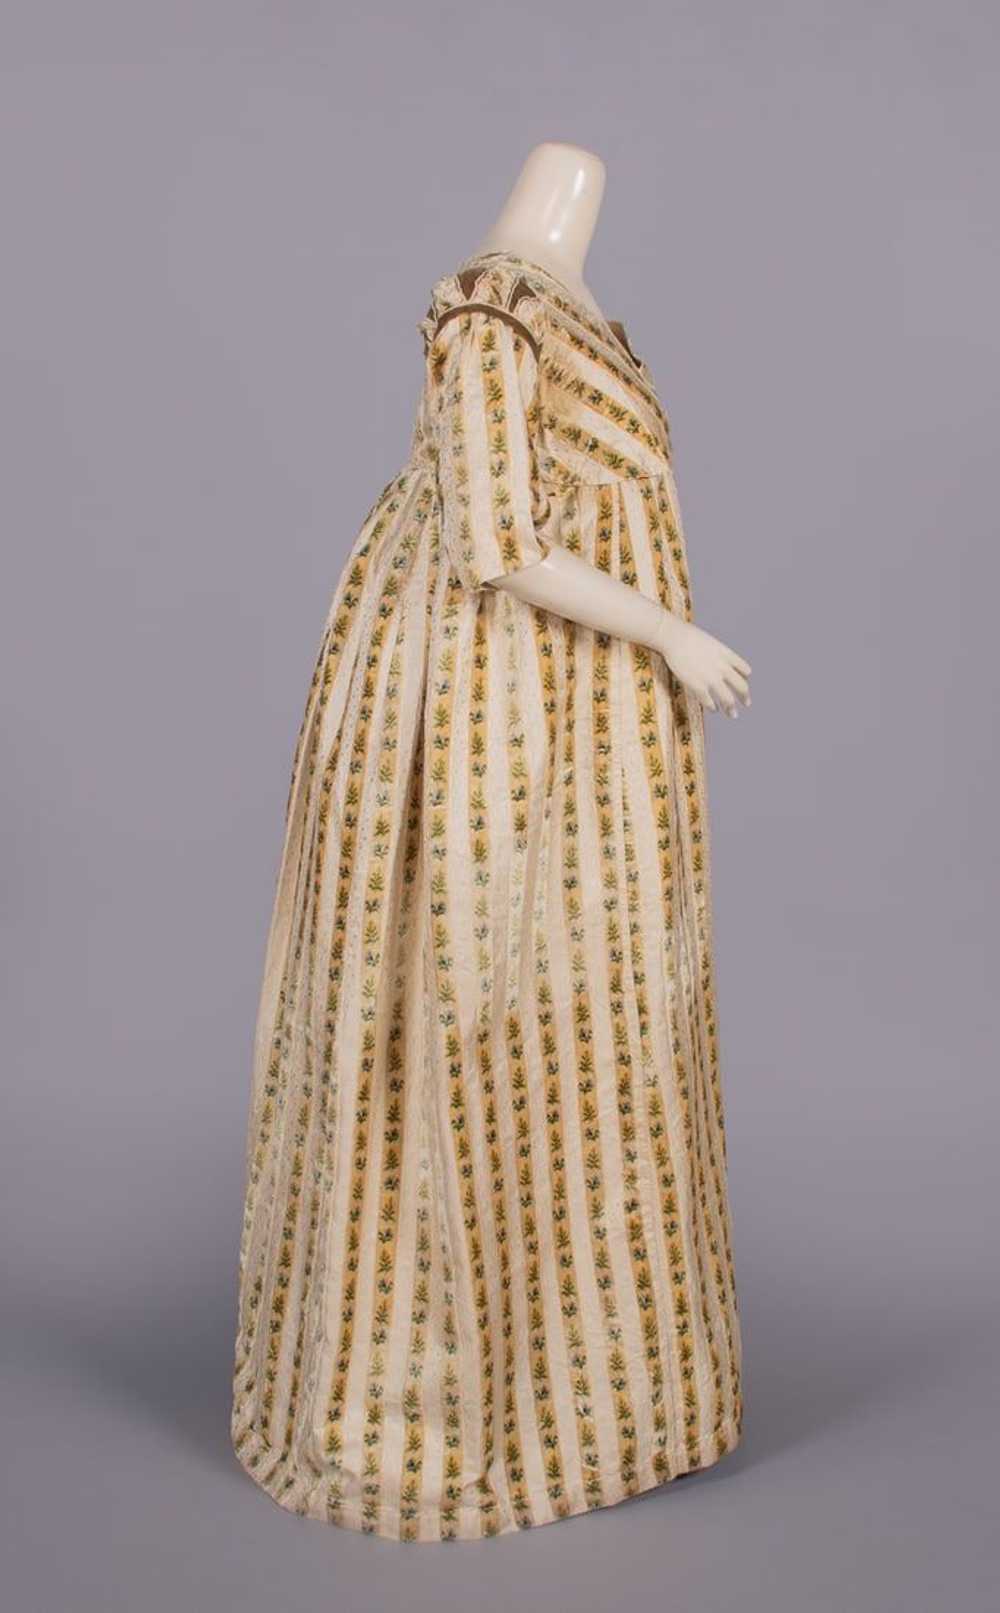 PRINTED VELVET & PATTERNED SILK ROUND GOWN, c. 17… - image 3